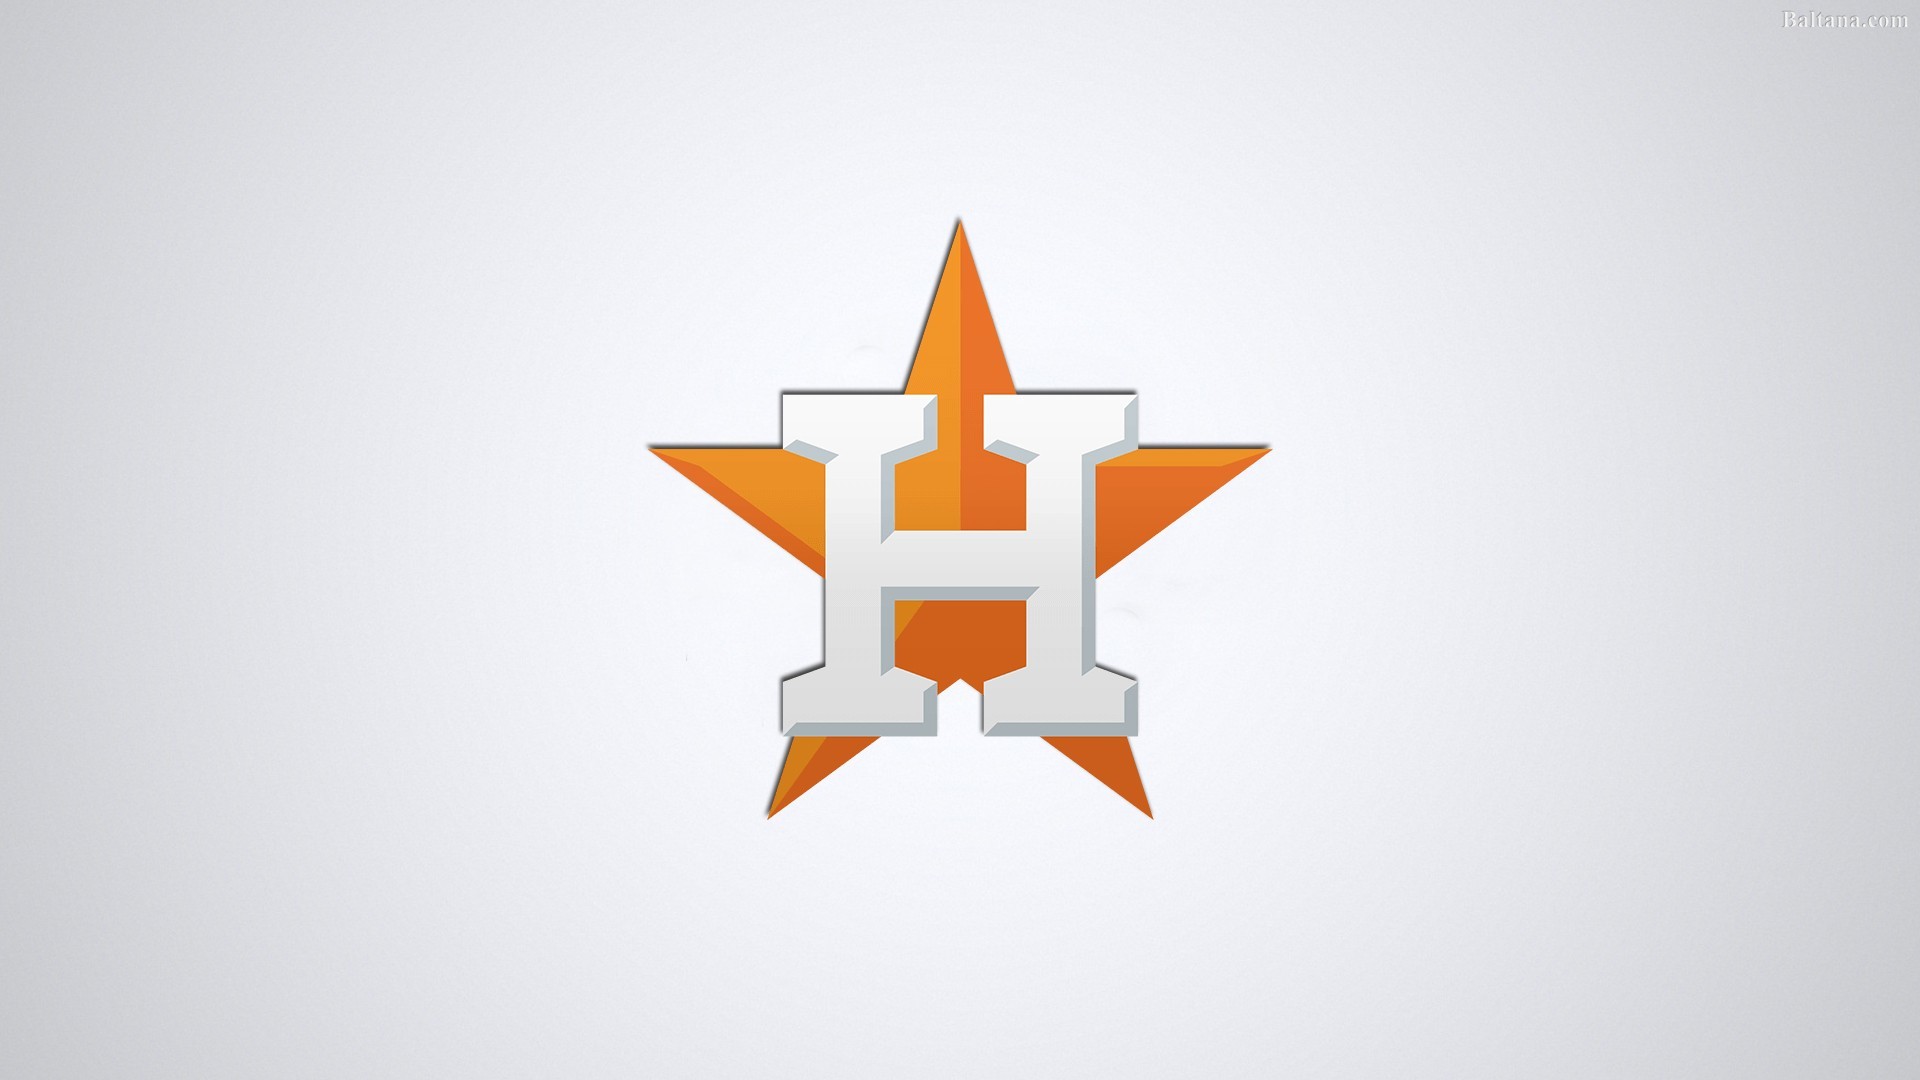 Wallpaper during WS Love my Rangers but will root for any Texas team   Houston astros baseball Astros baseball Mlb wallpaper